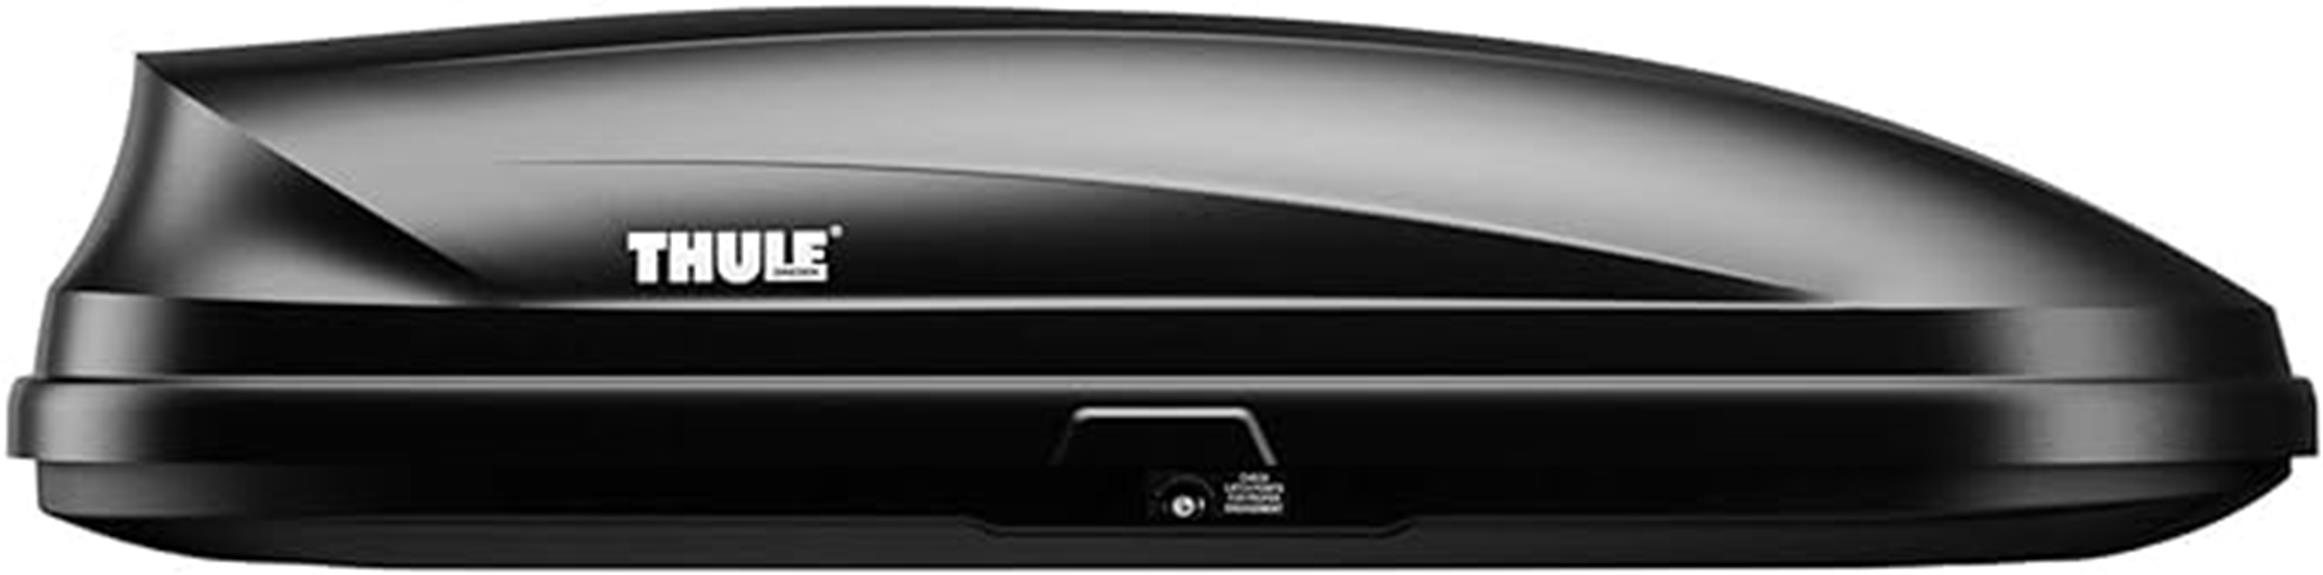 thule rooftop cargo box